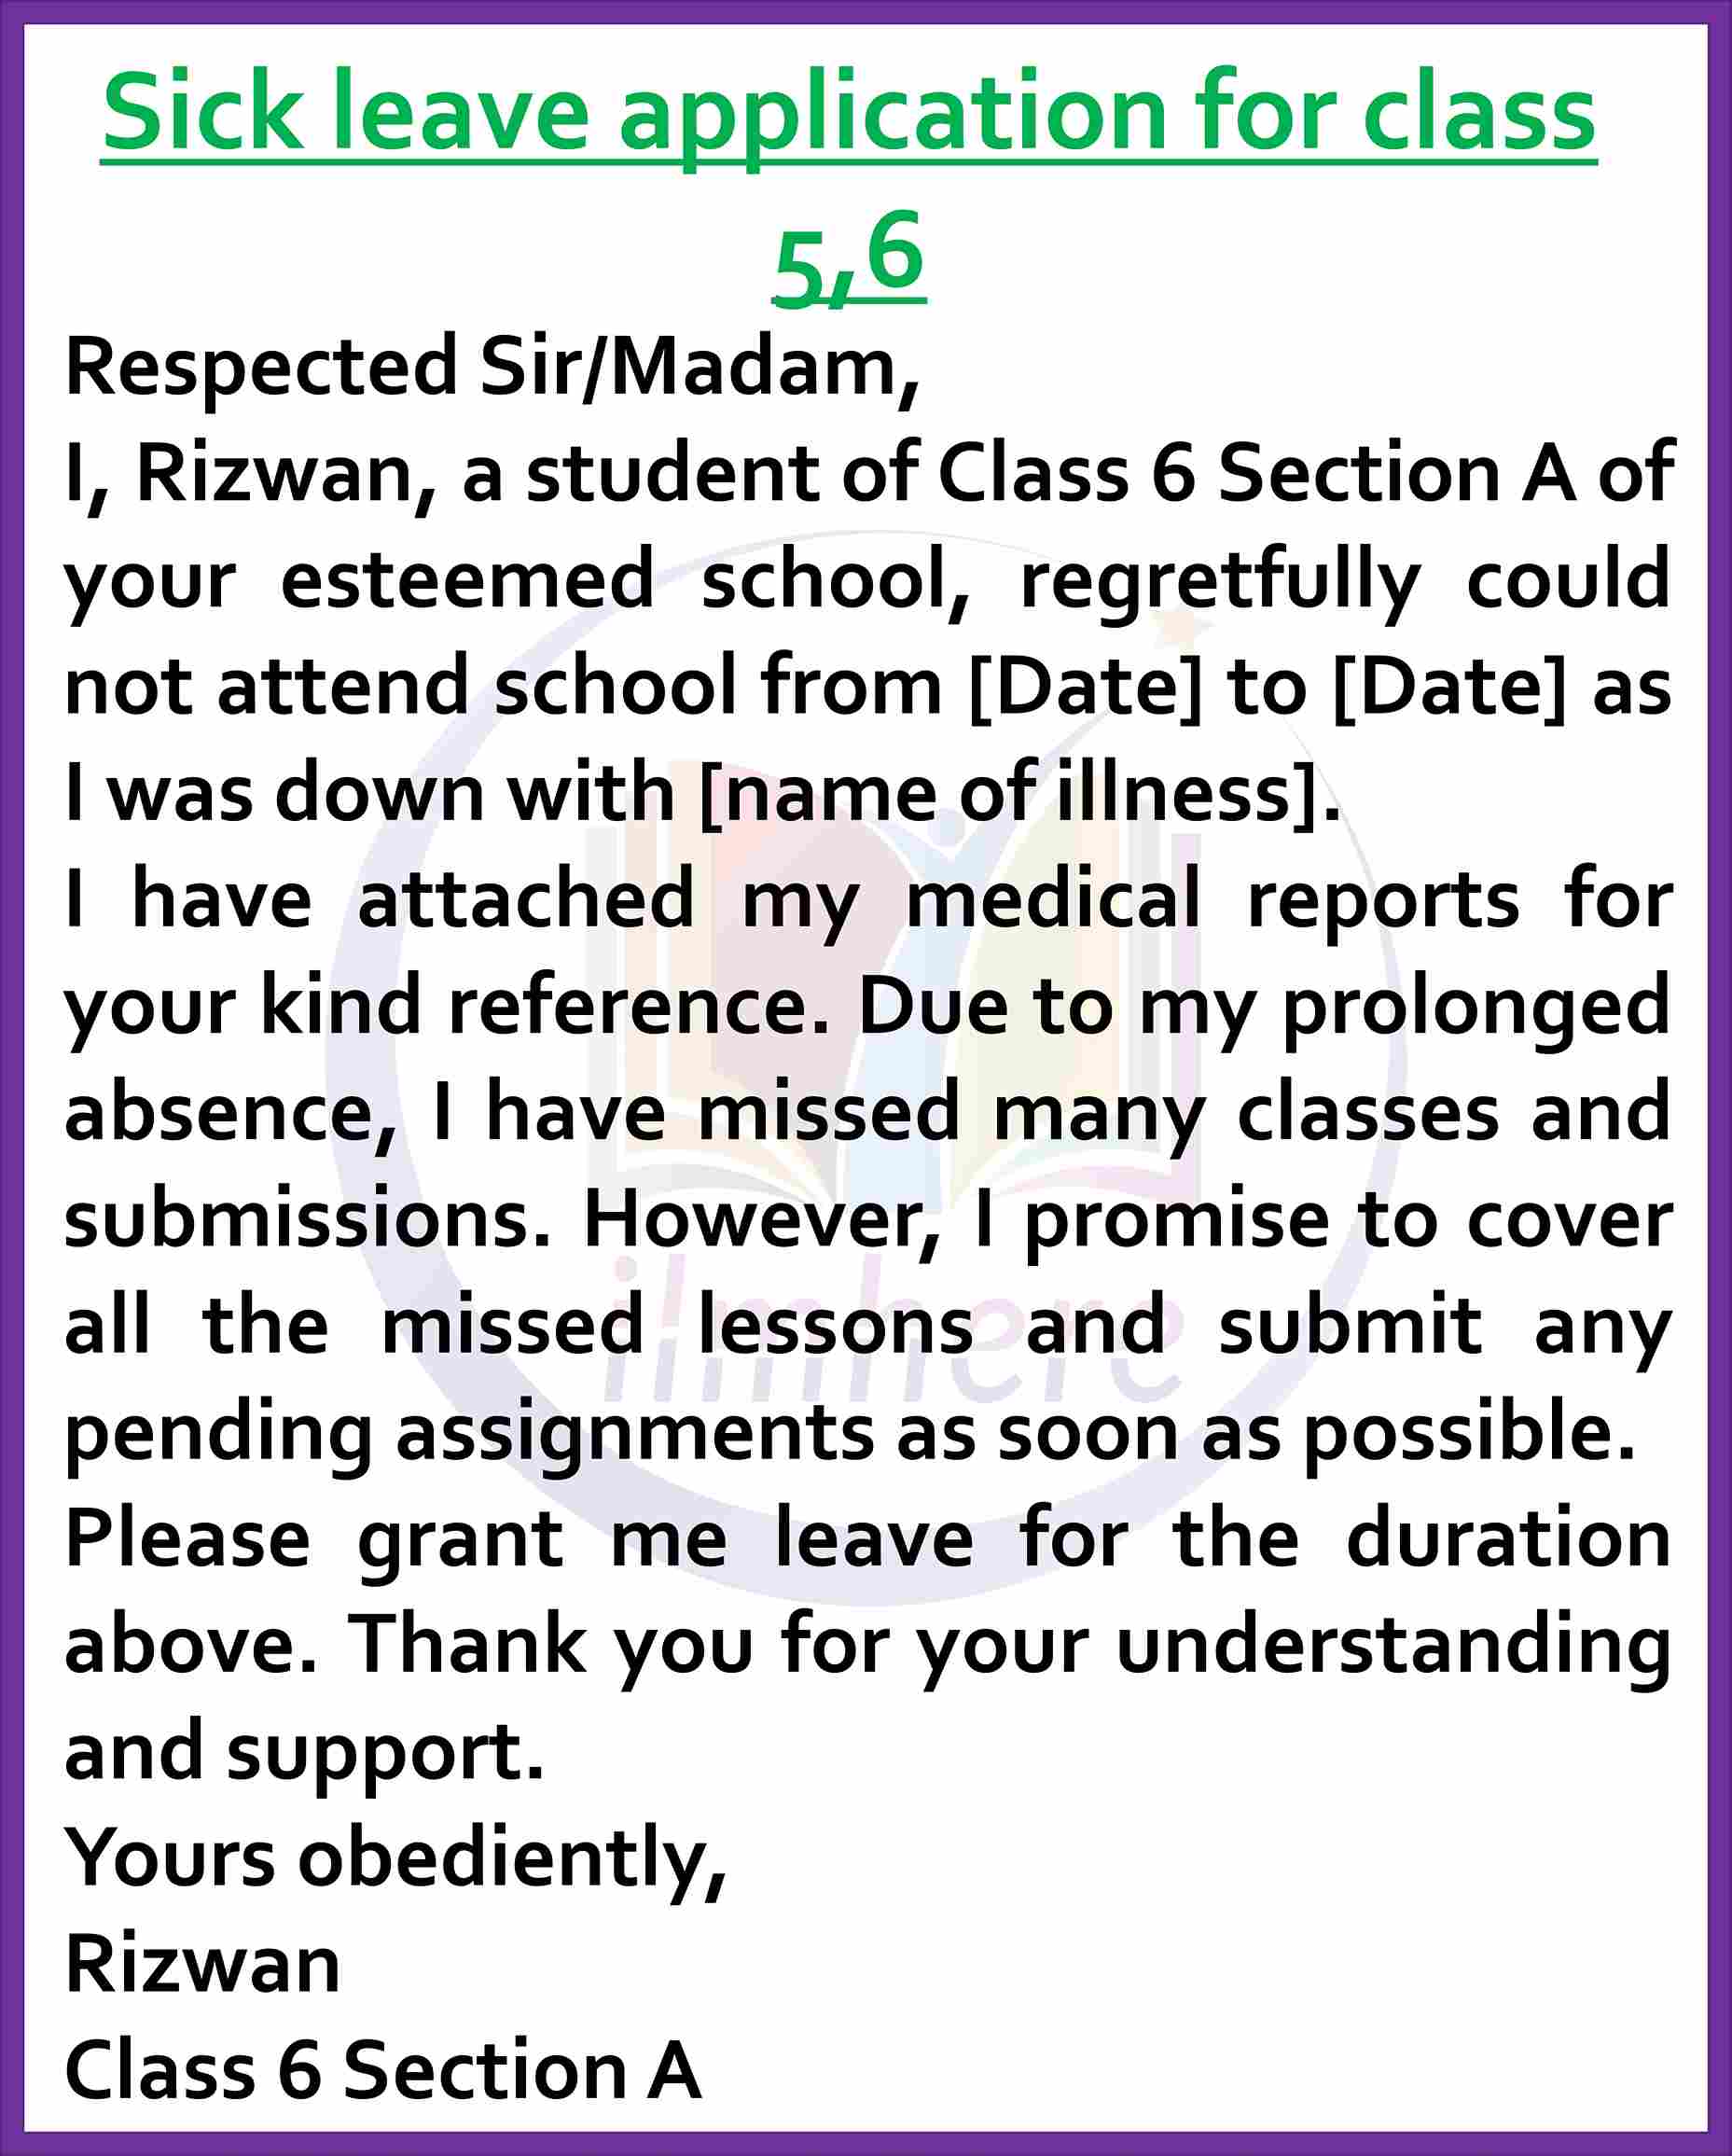 Sick leave application for 5,6